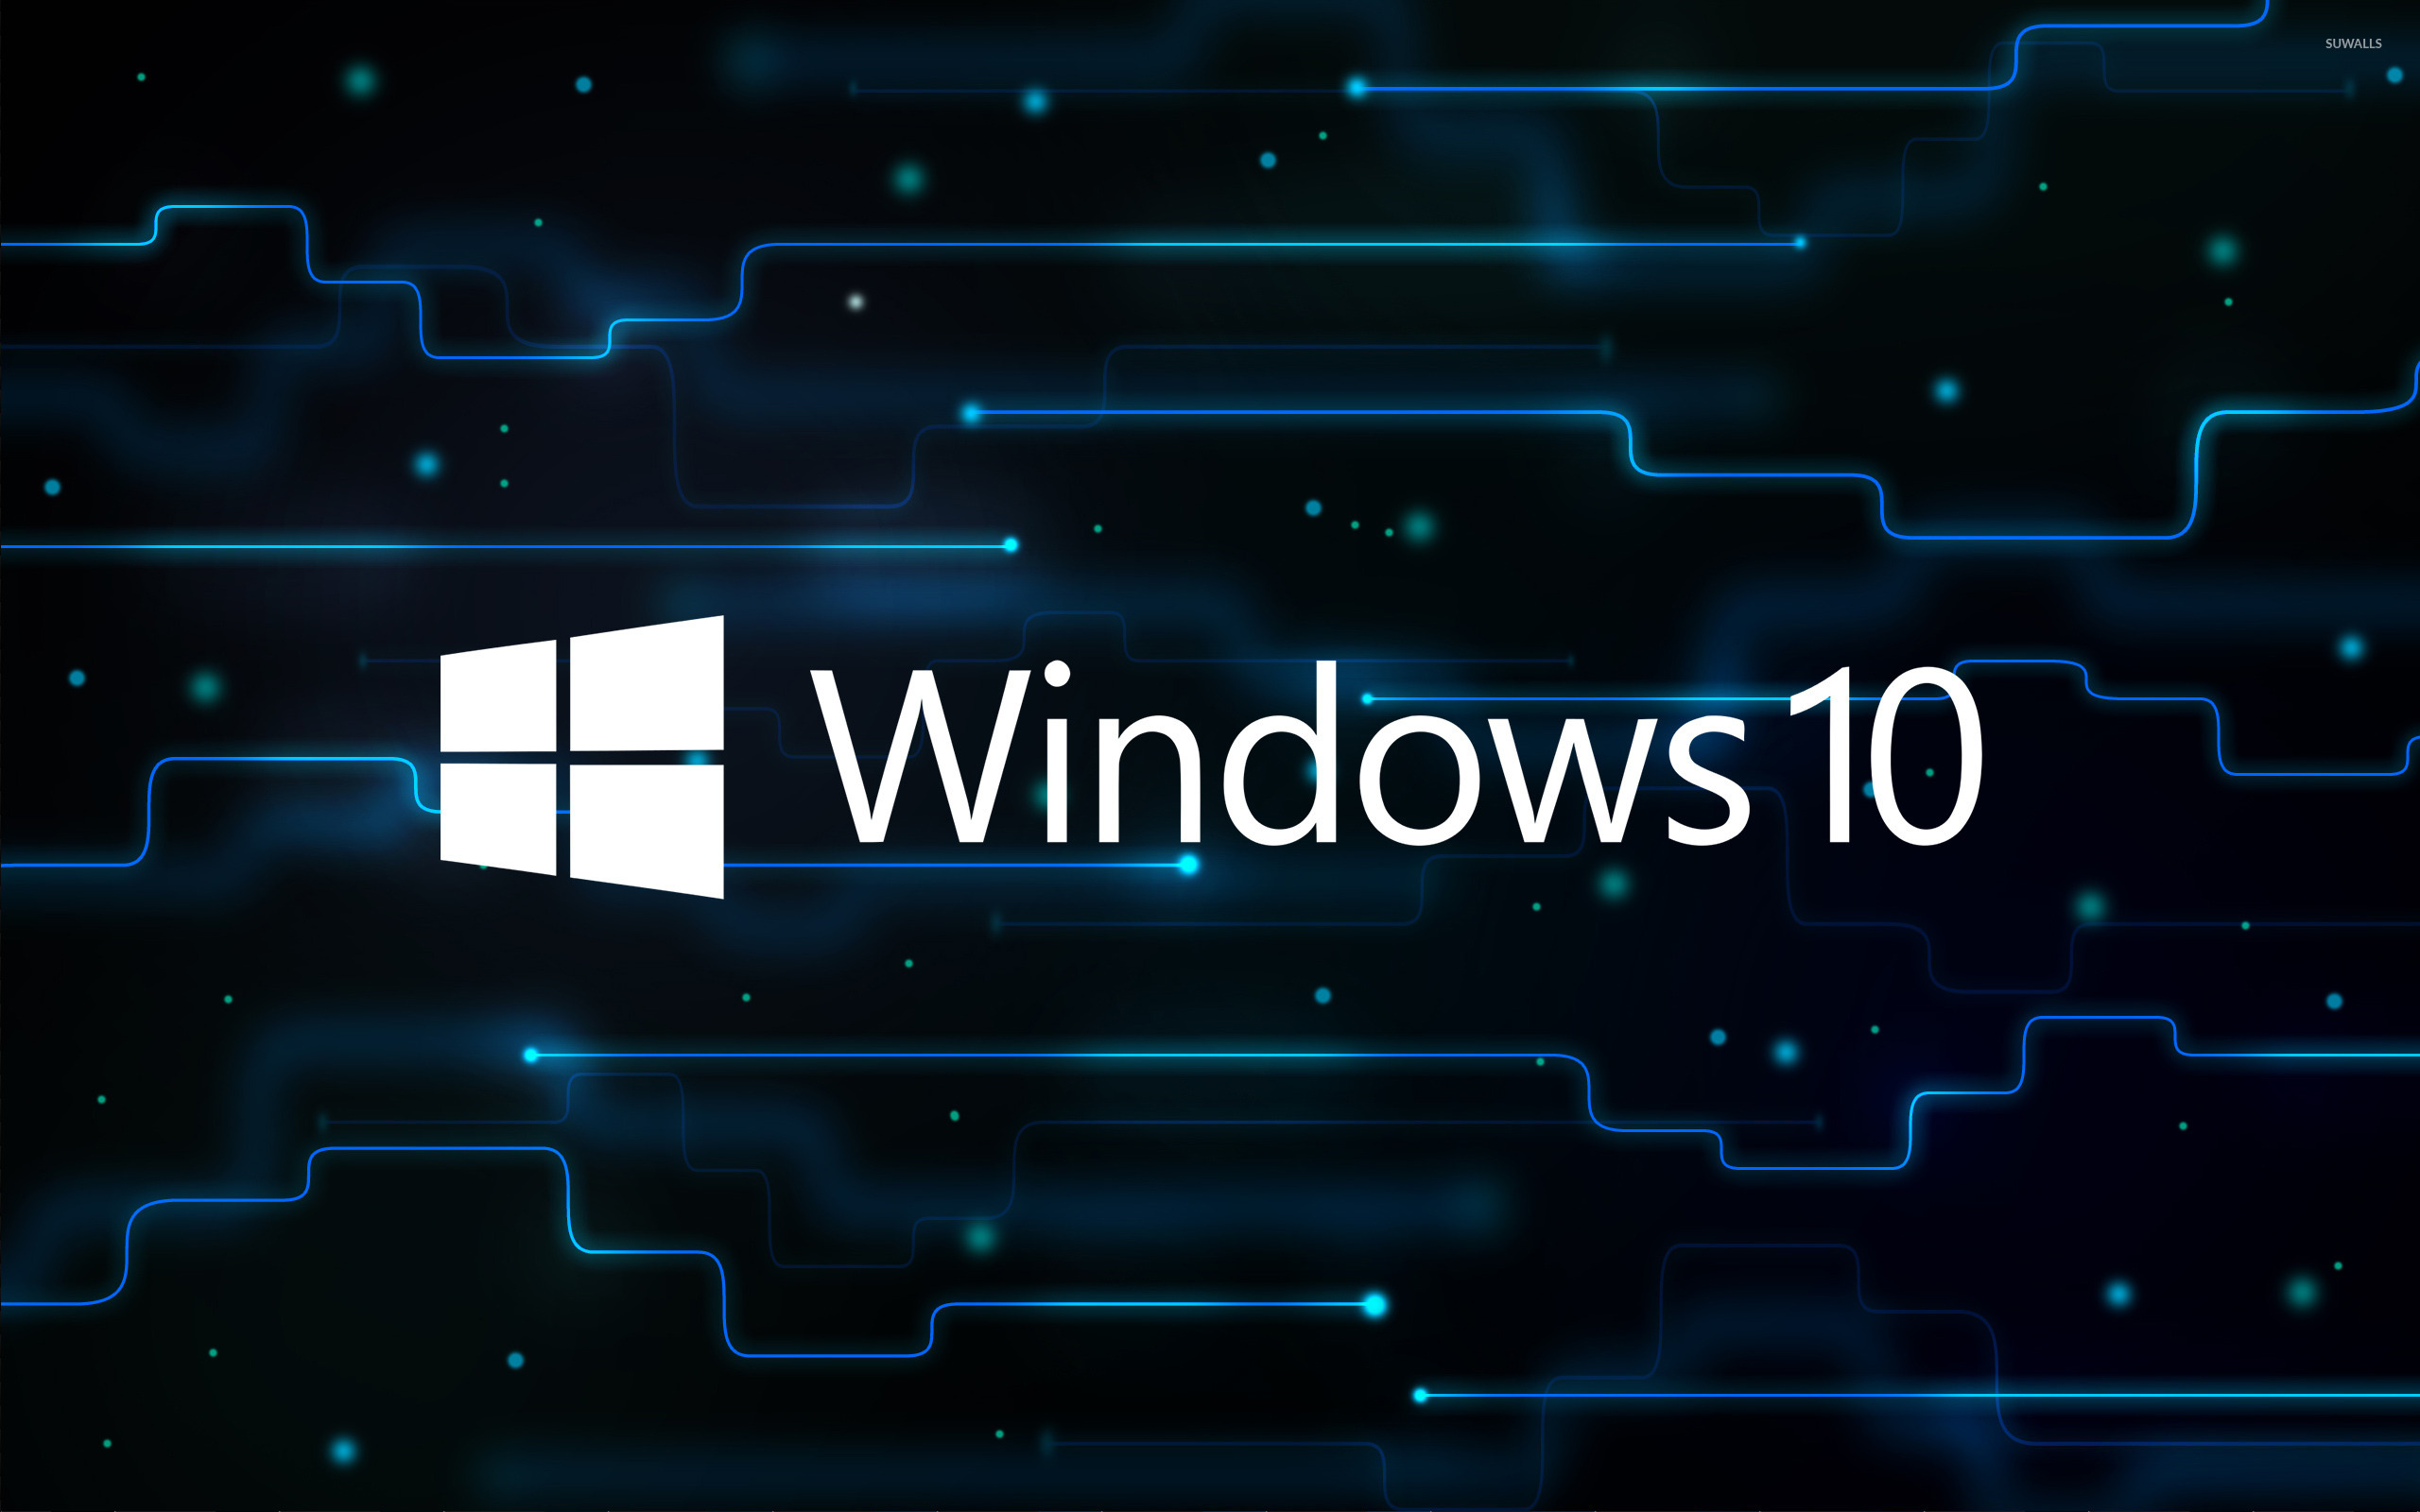 Windows 10 White Text Logo On A Network Wallpaper Computer Wallpapers